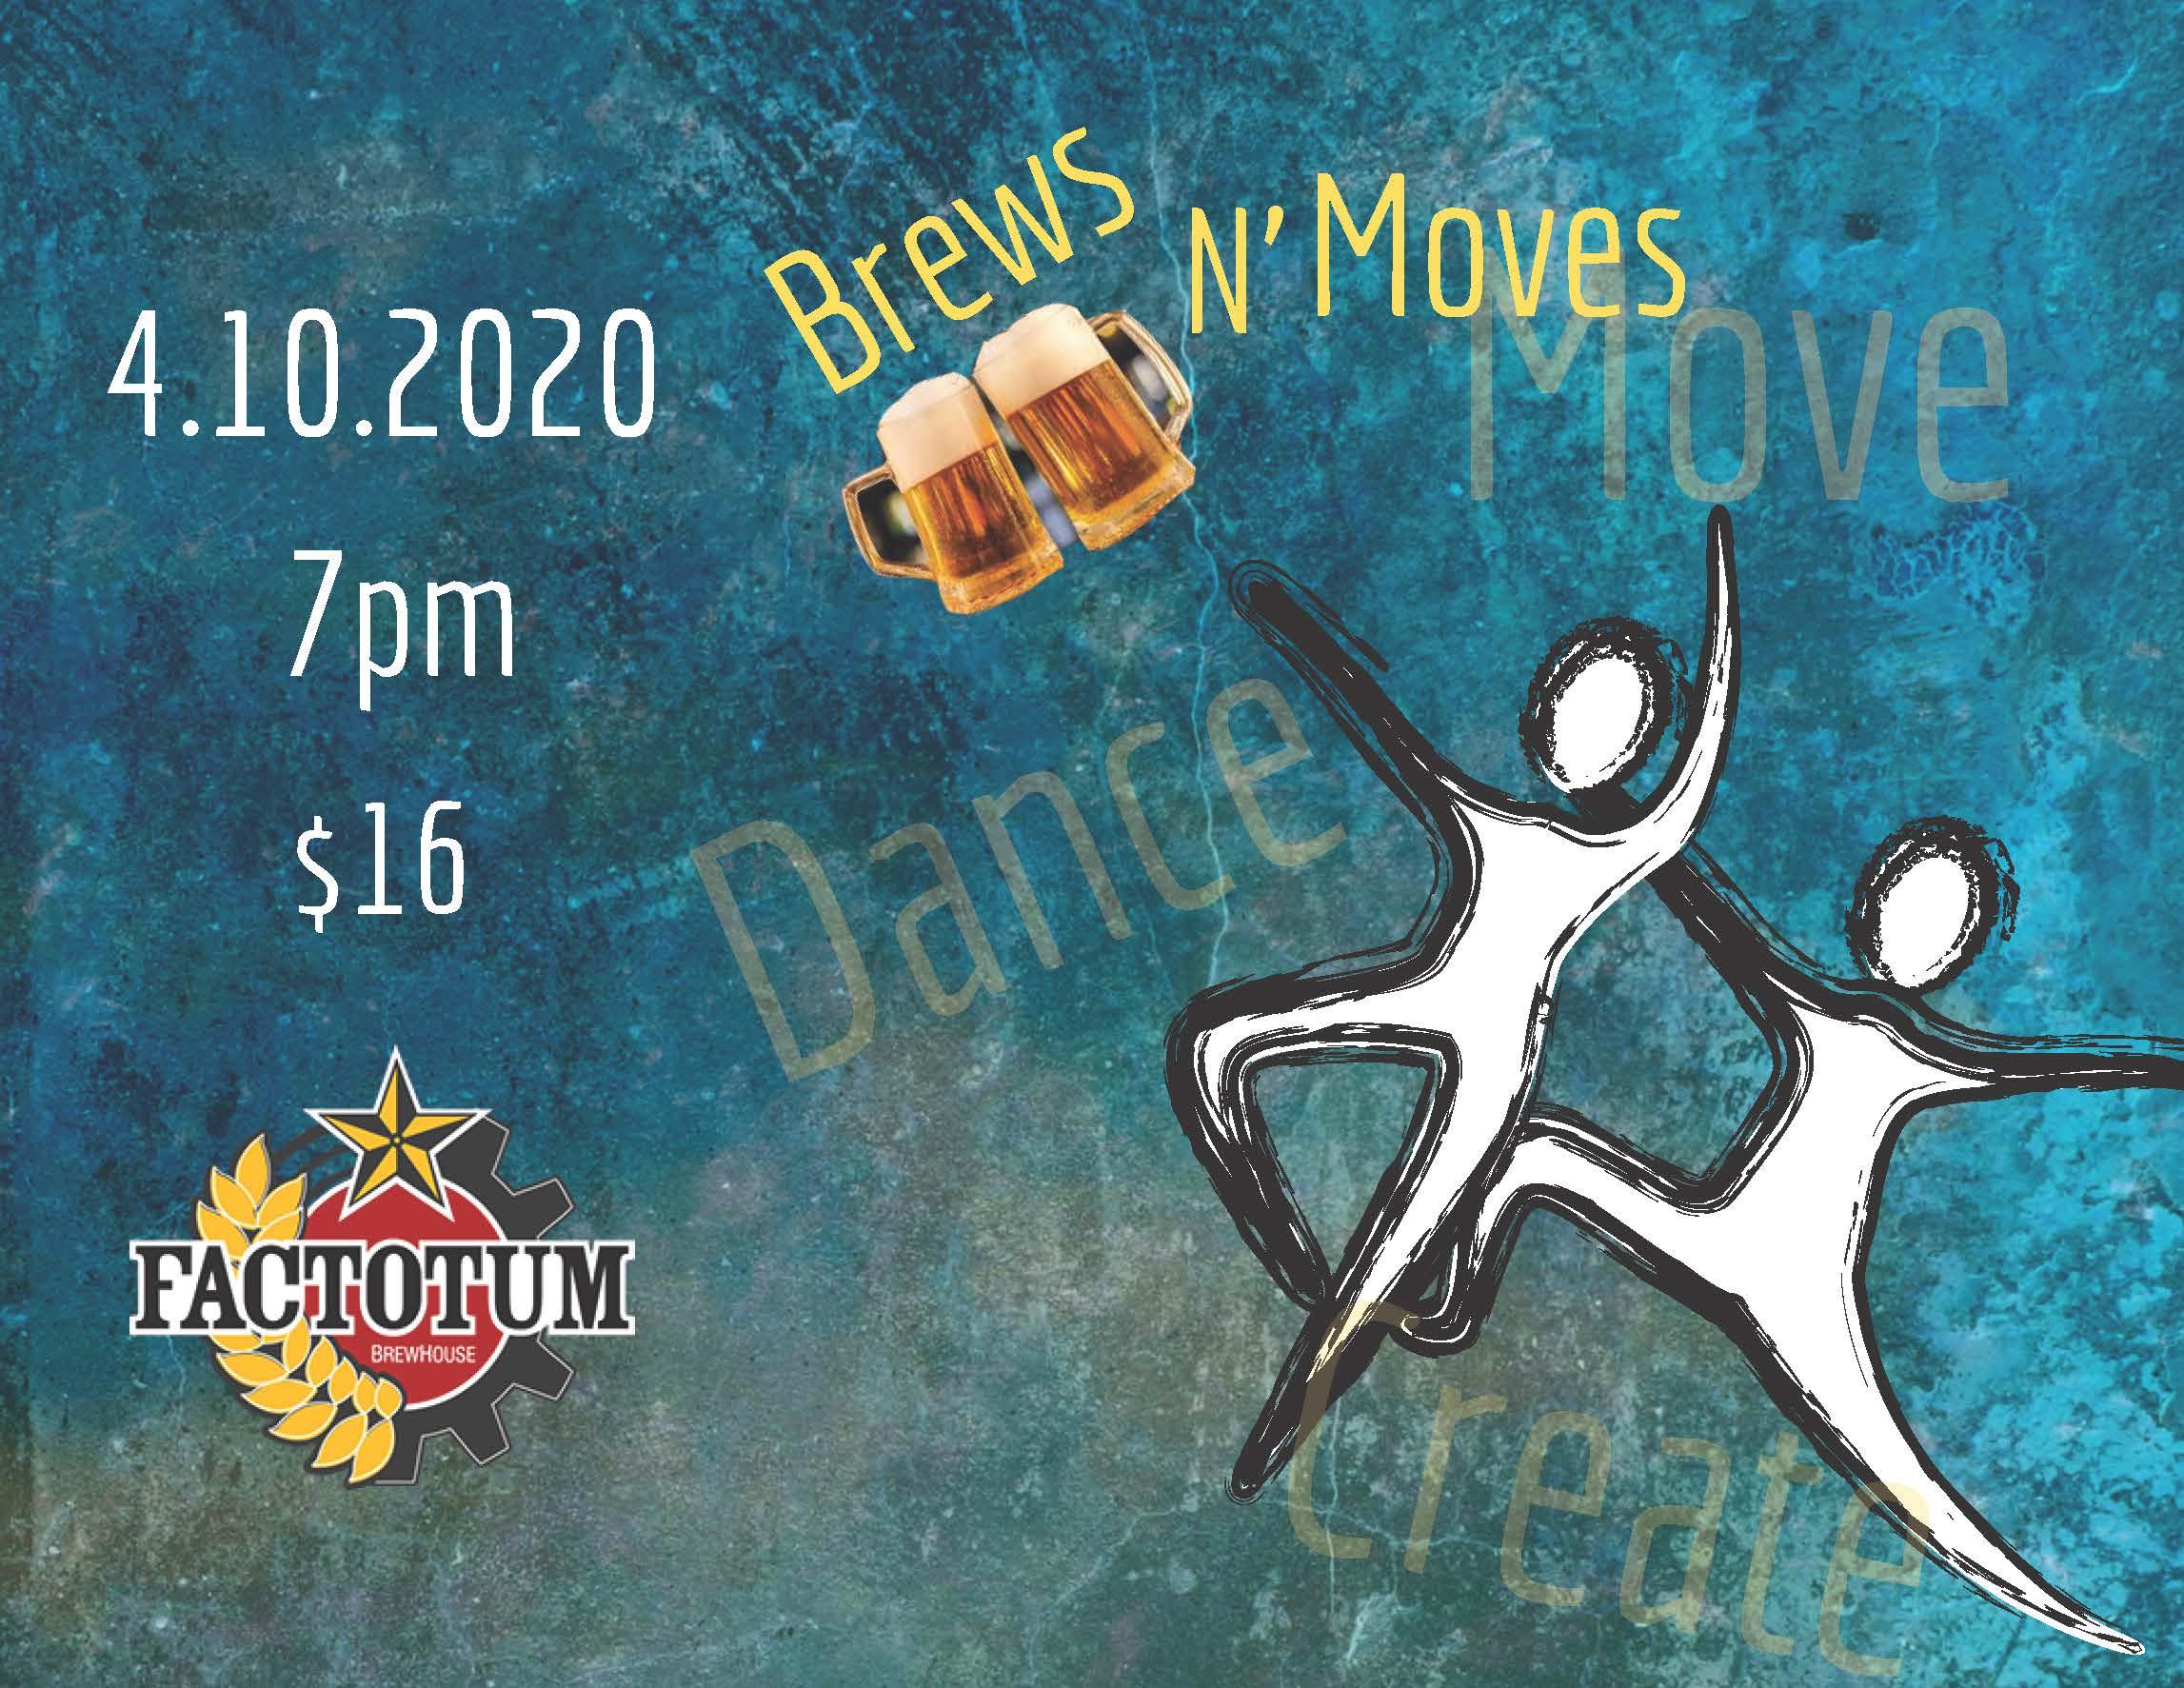 Brews N' Moves- Creative Dance at Factotum Brewhouse